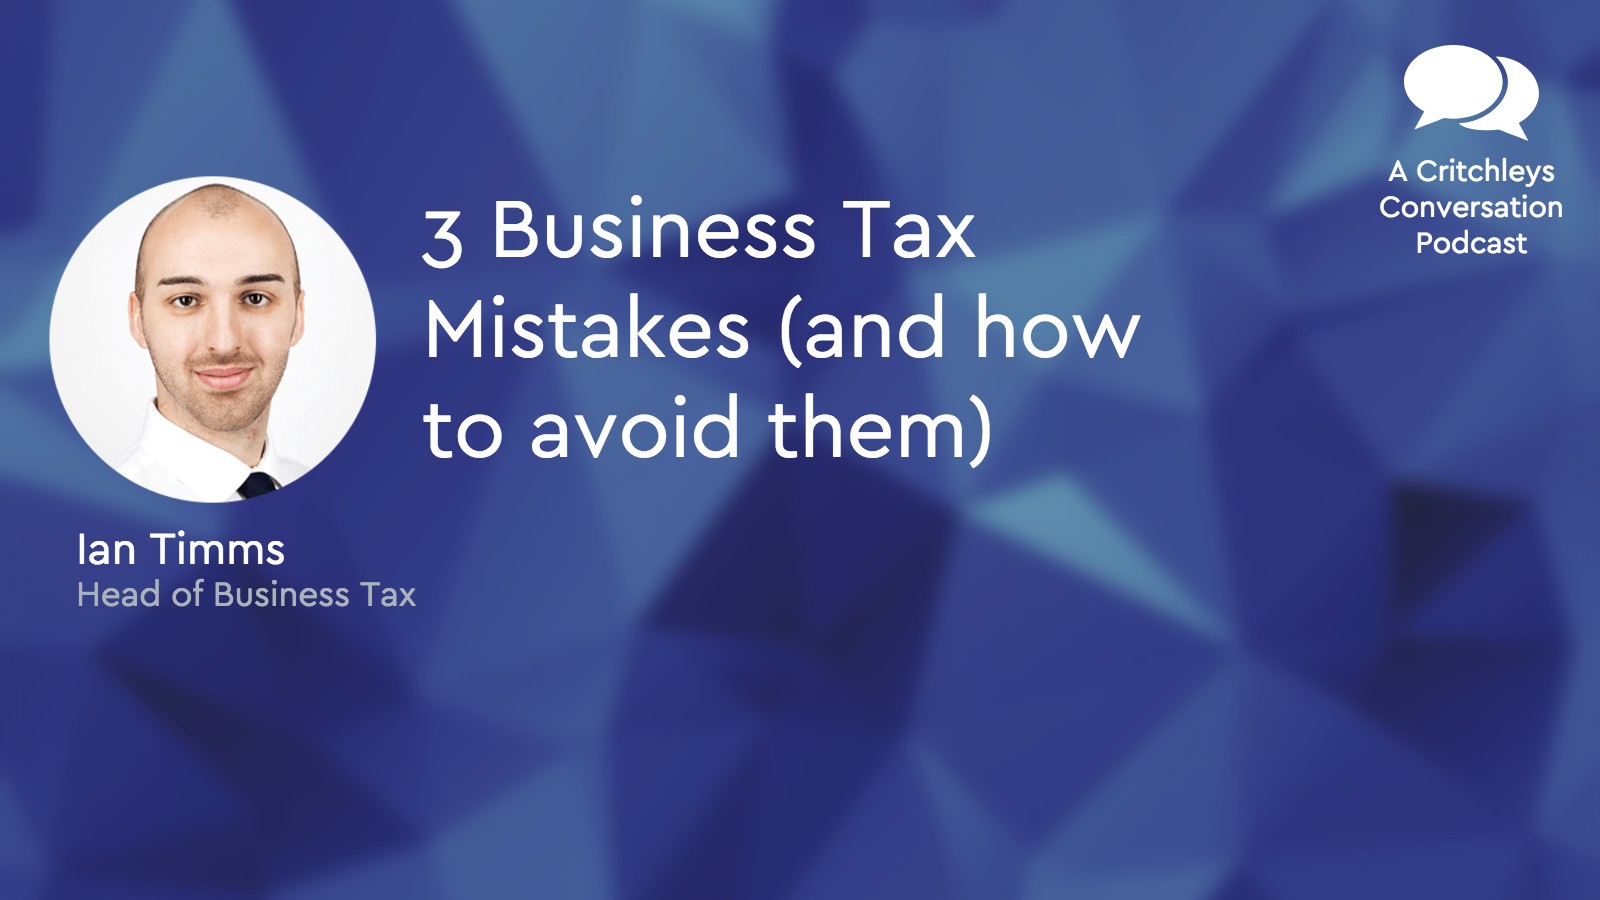 3 Business Tax Mistakes (and how to avoid them)